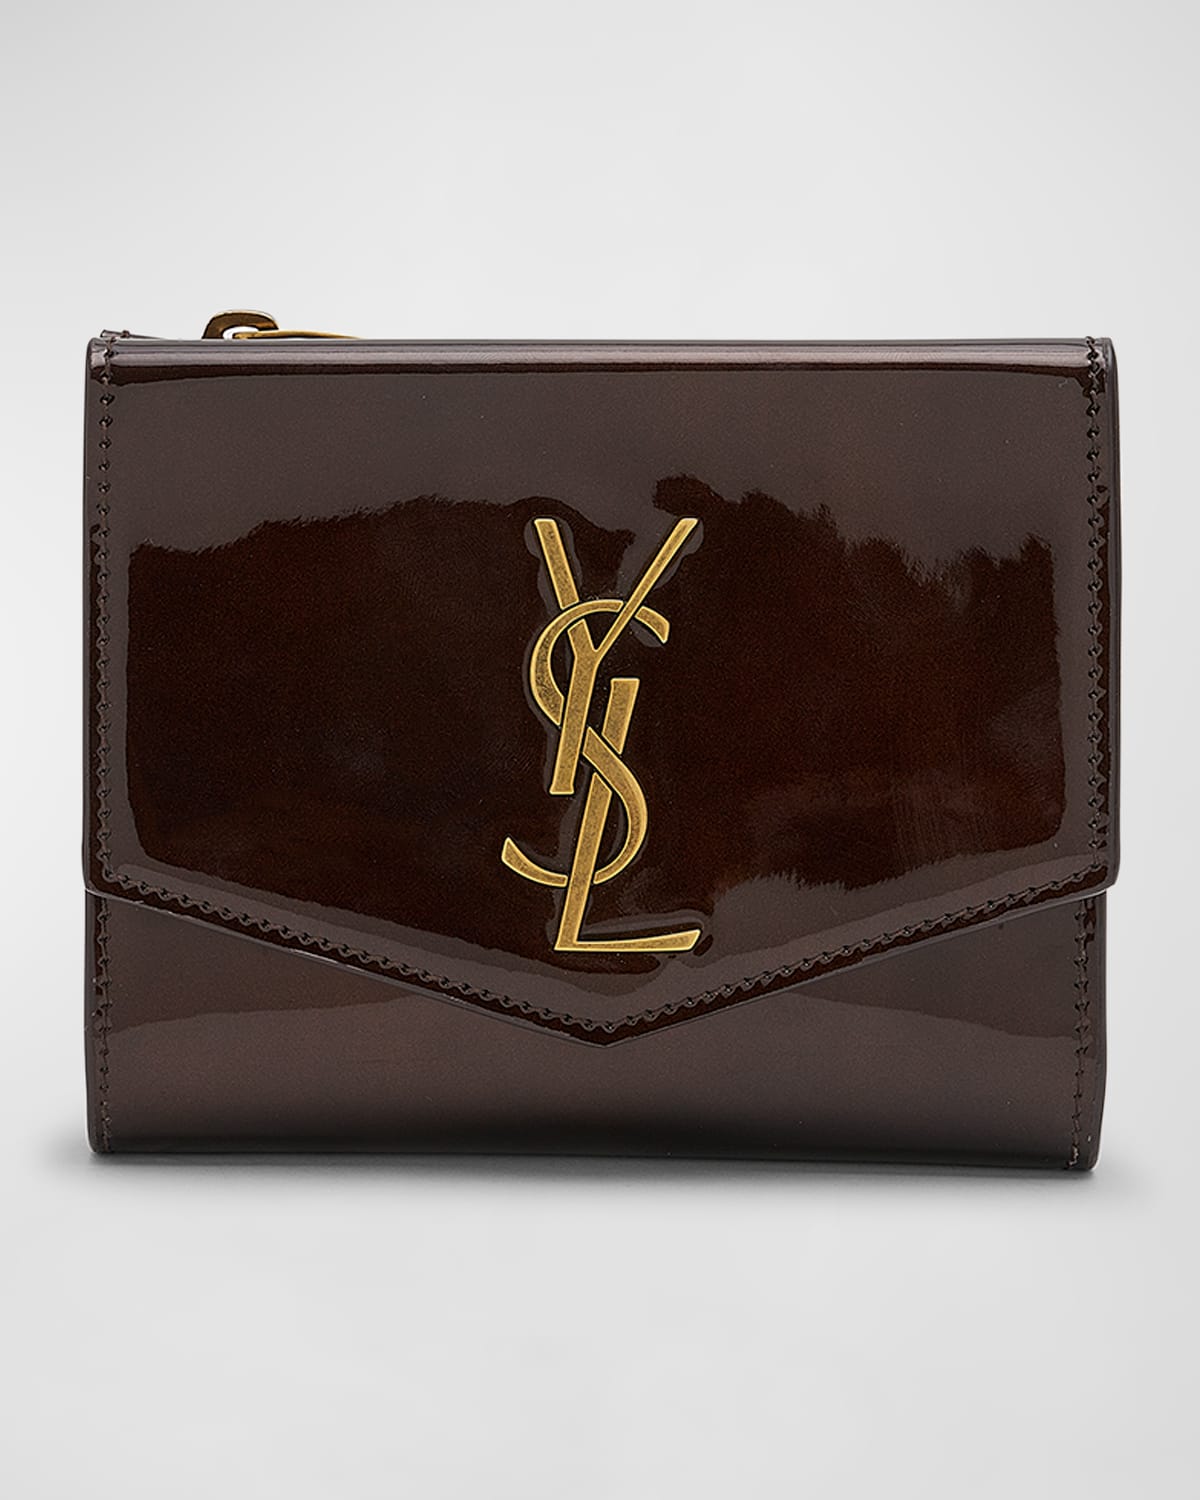 SAINT LAURENT YSL MONOGRAM SMALL ENVELOPE FLAP WALLET WITH ZIP POCKET IN PATENT LEATHER